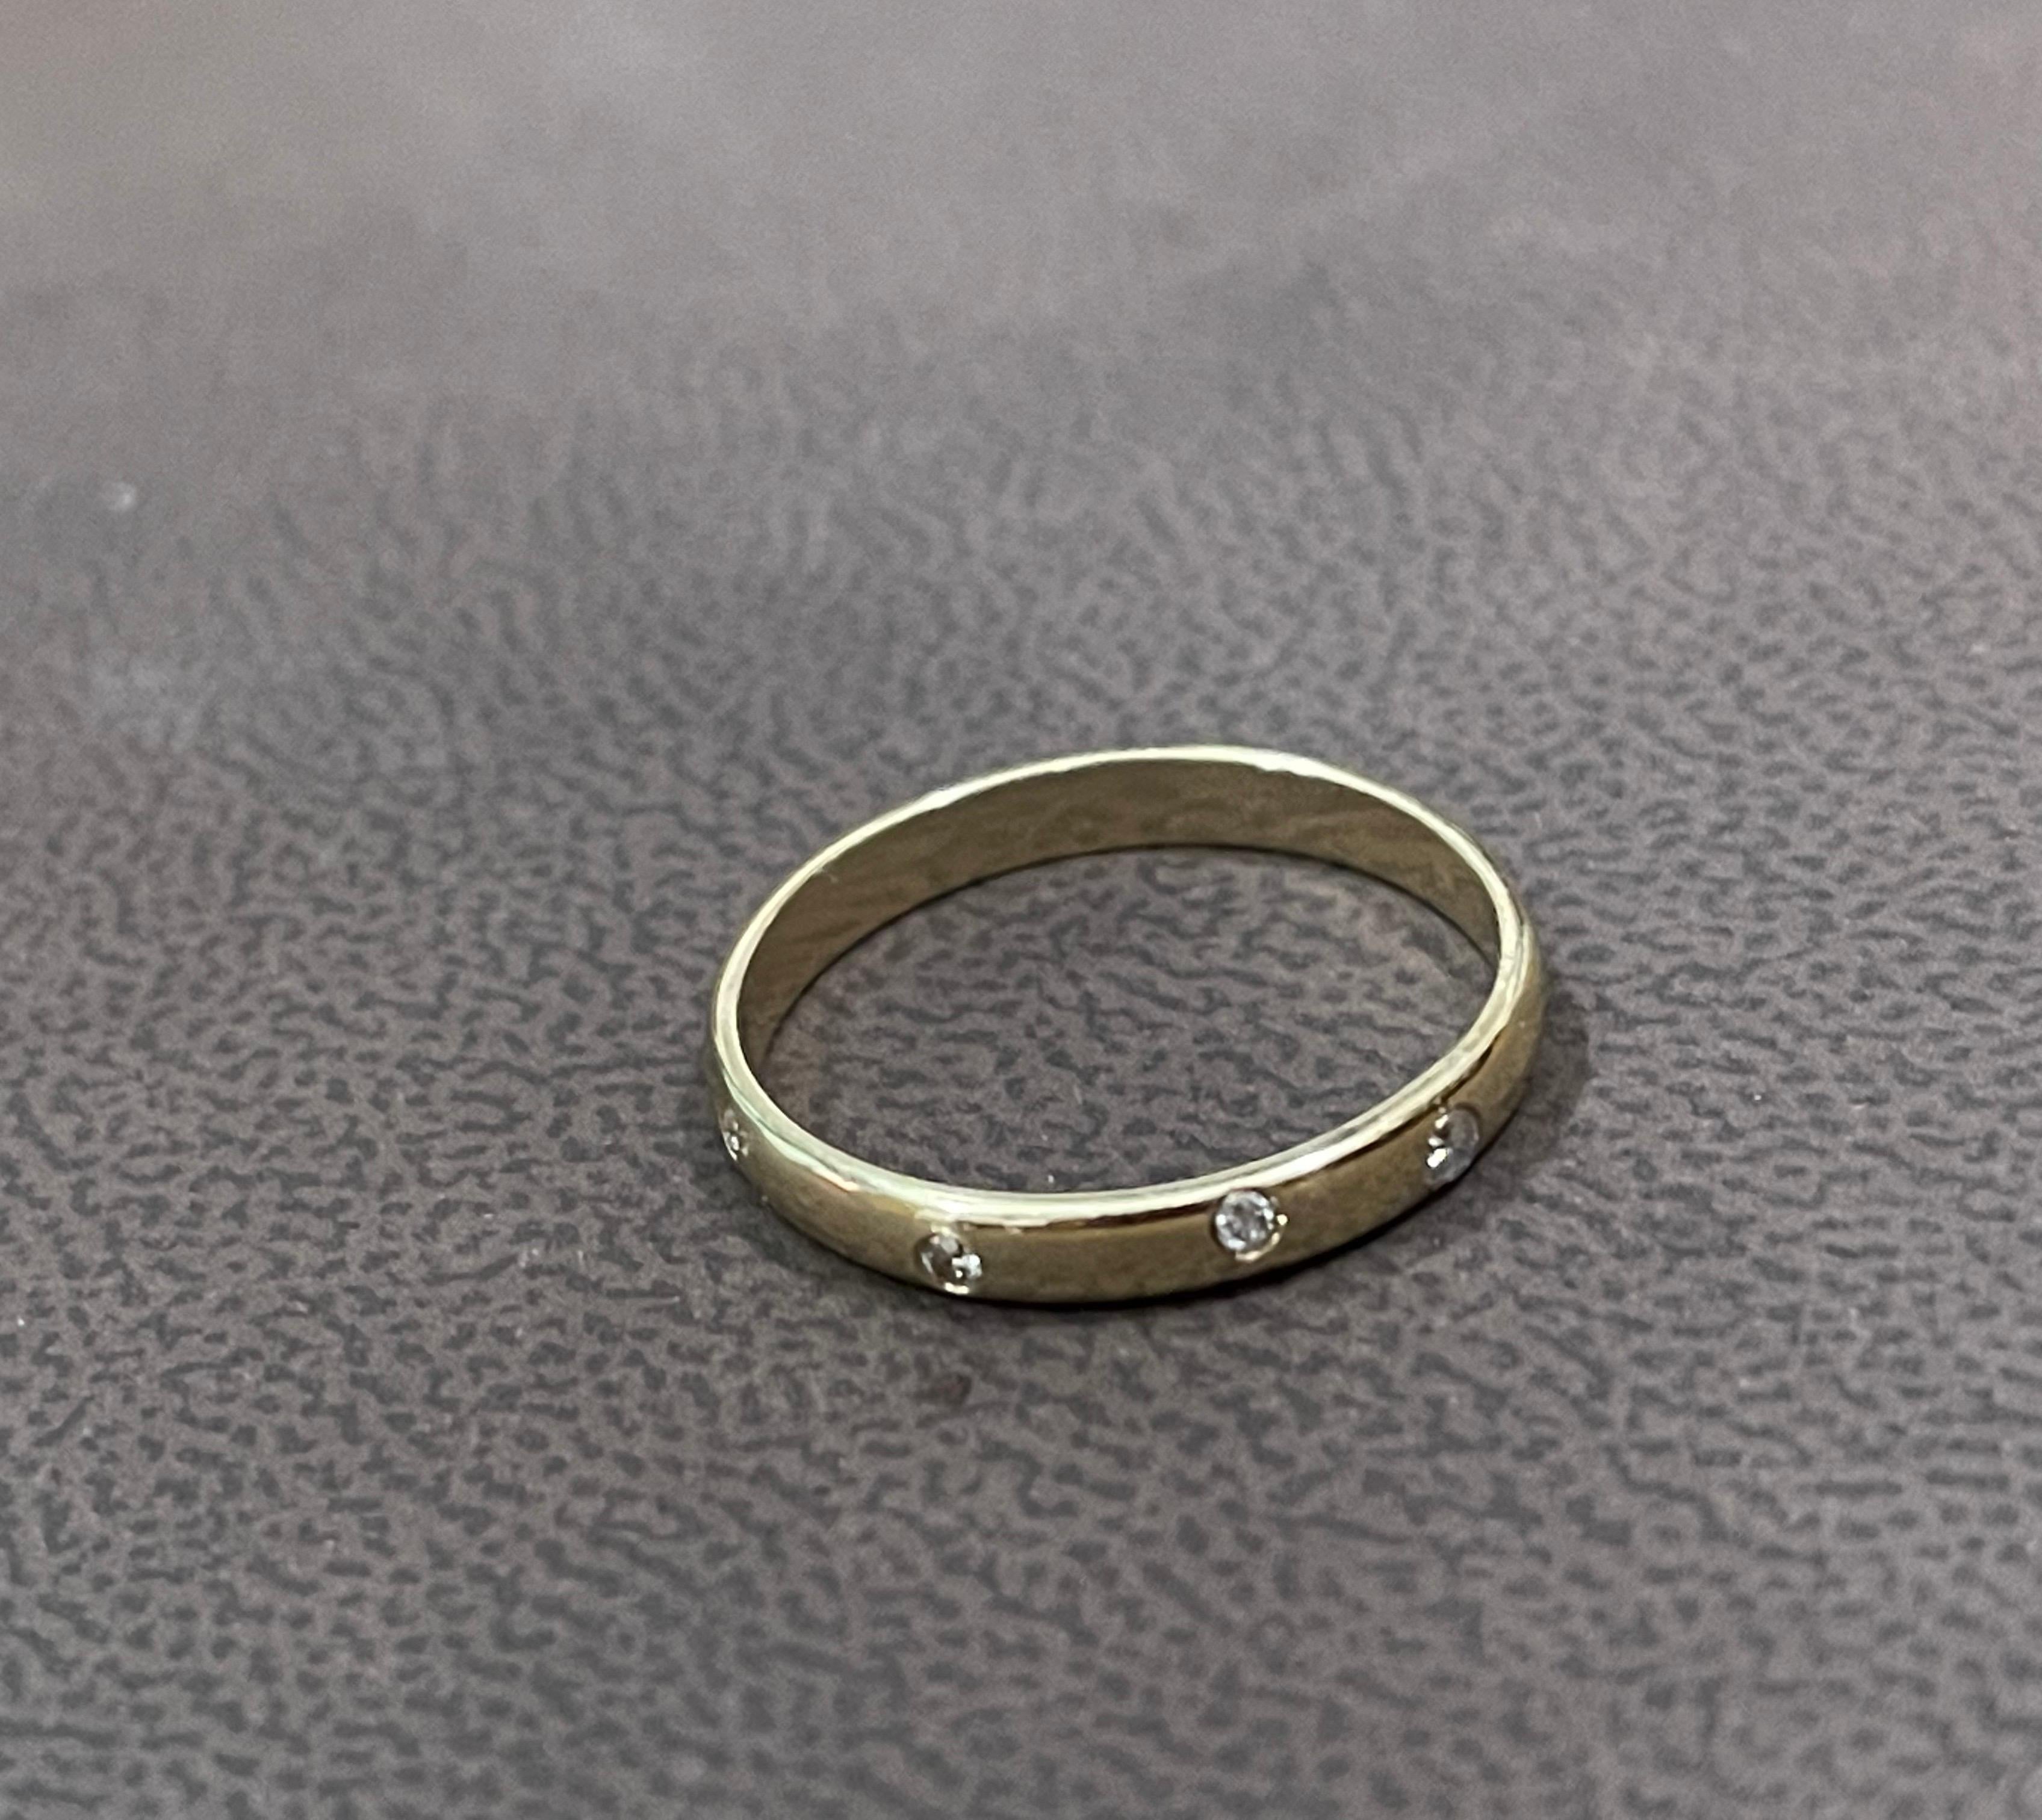 6 Flush Set Bezel Diamond Eternity Wedding Band in 14 Karat Yellow Gold Size 7.5
Very clean and shiny diamonds.
This eternity band features Gypsy set or burnished, the bright white diamonds , 14k gold band ring shines brightly and is a perennial